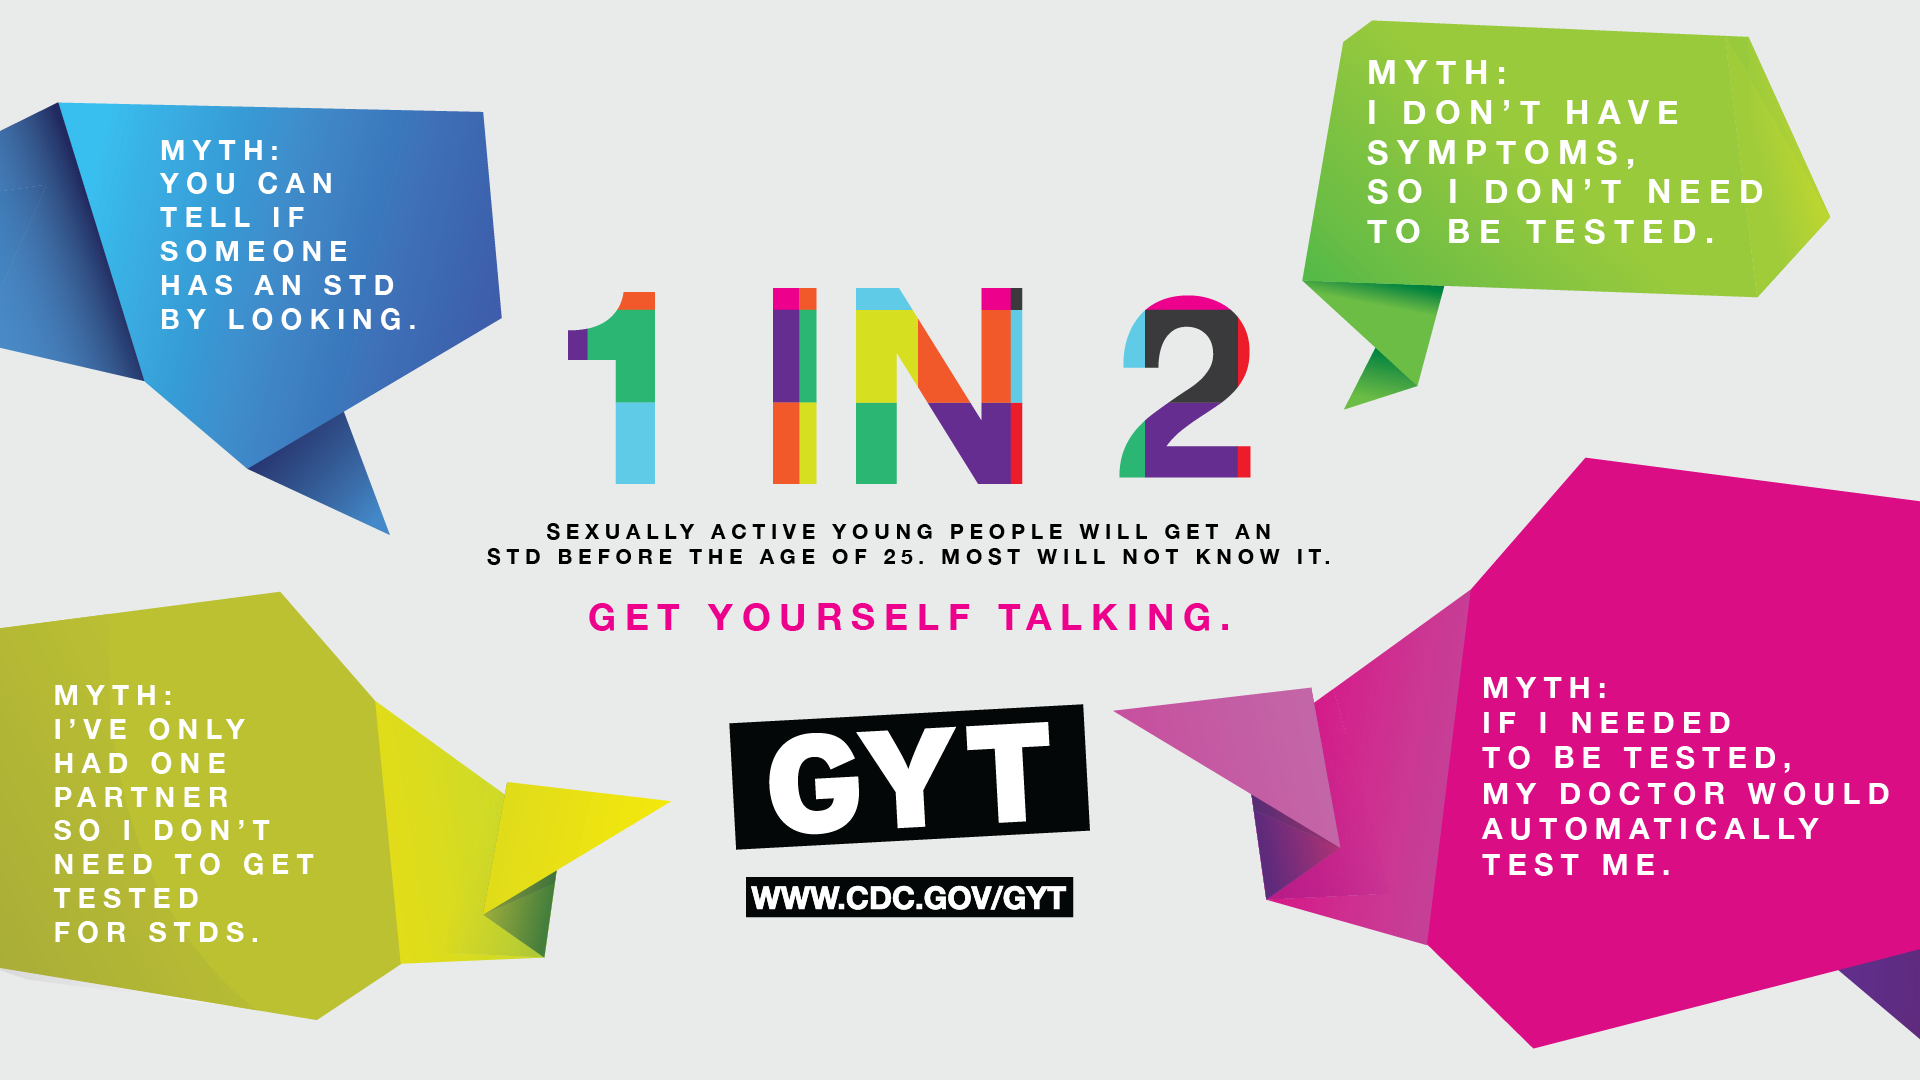 1 in 2 sexually active young people will get an STD before the age of 23. Most will not know it.  Get yourself talking. 